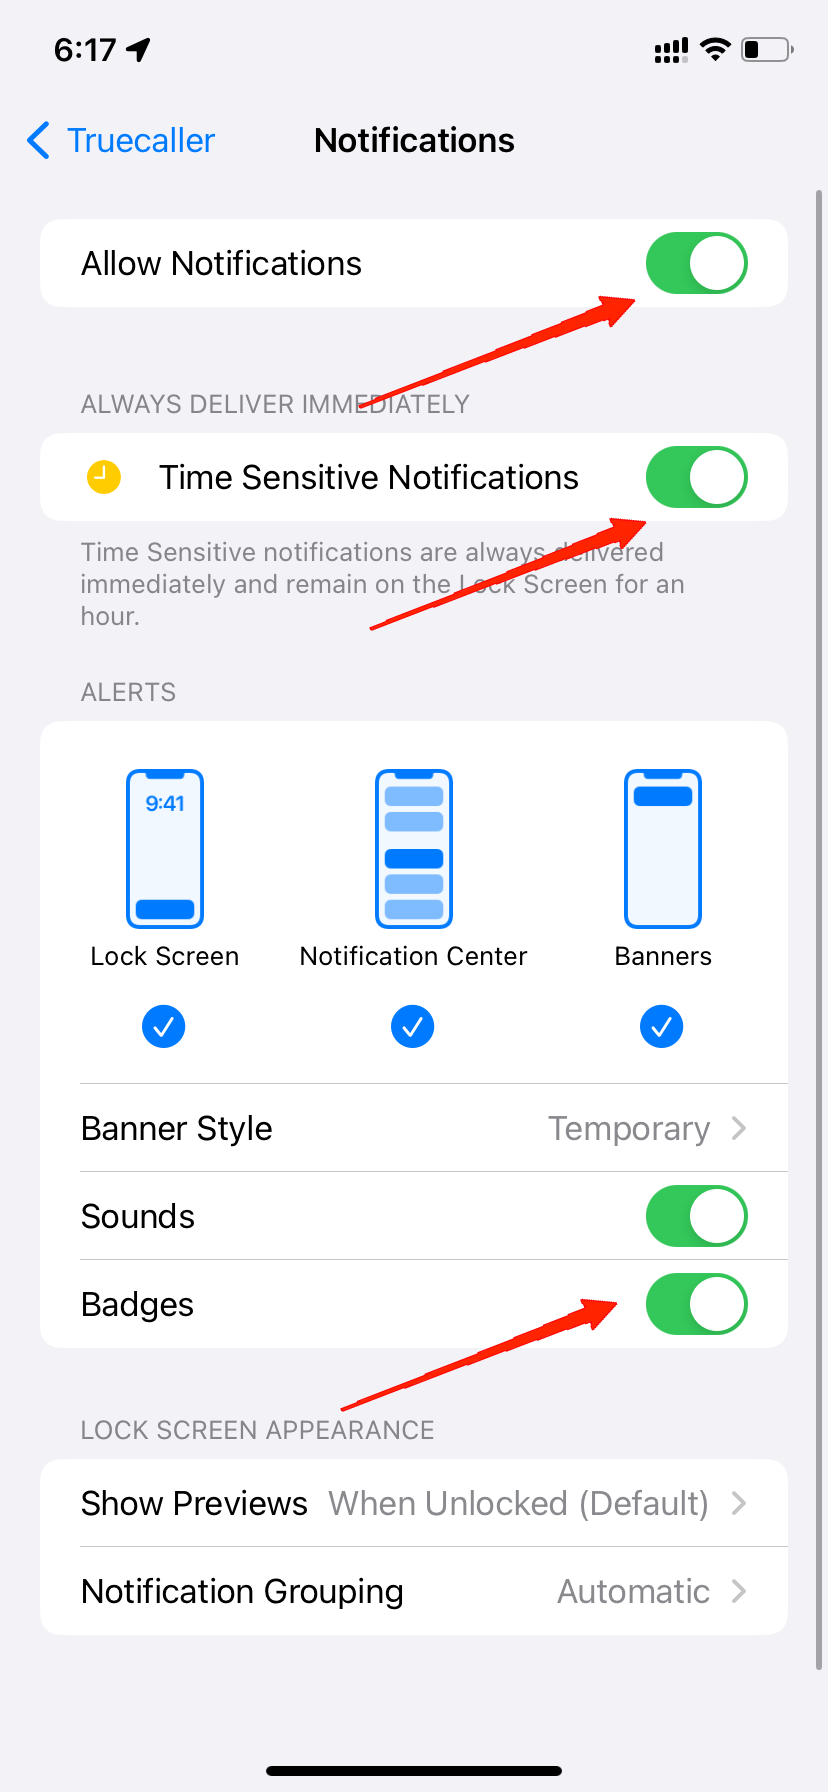 Make-sure-you-have-enabled-all-the-notification-preferences